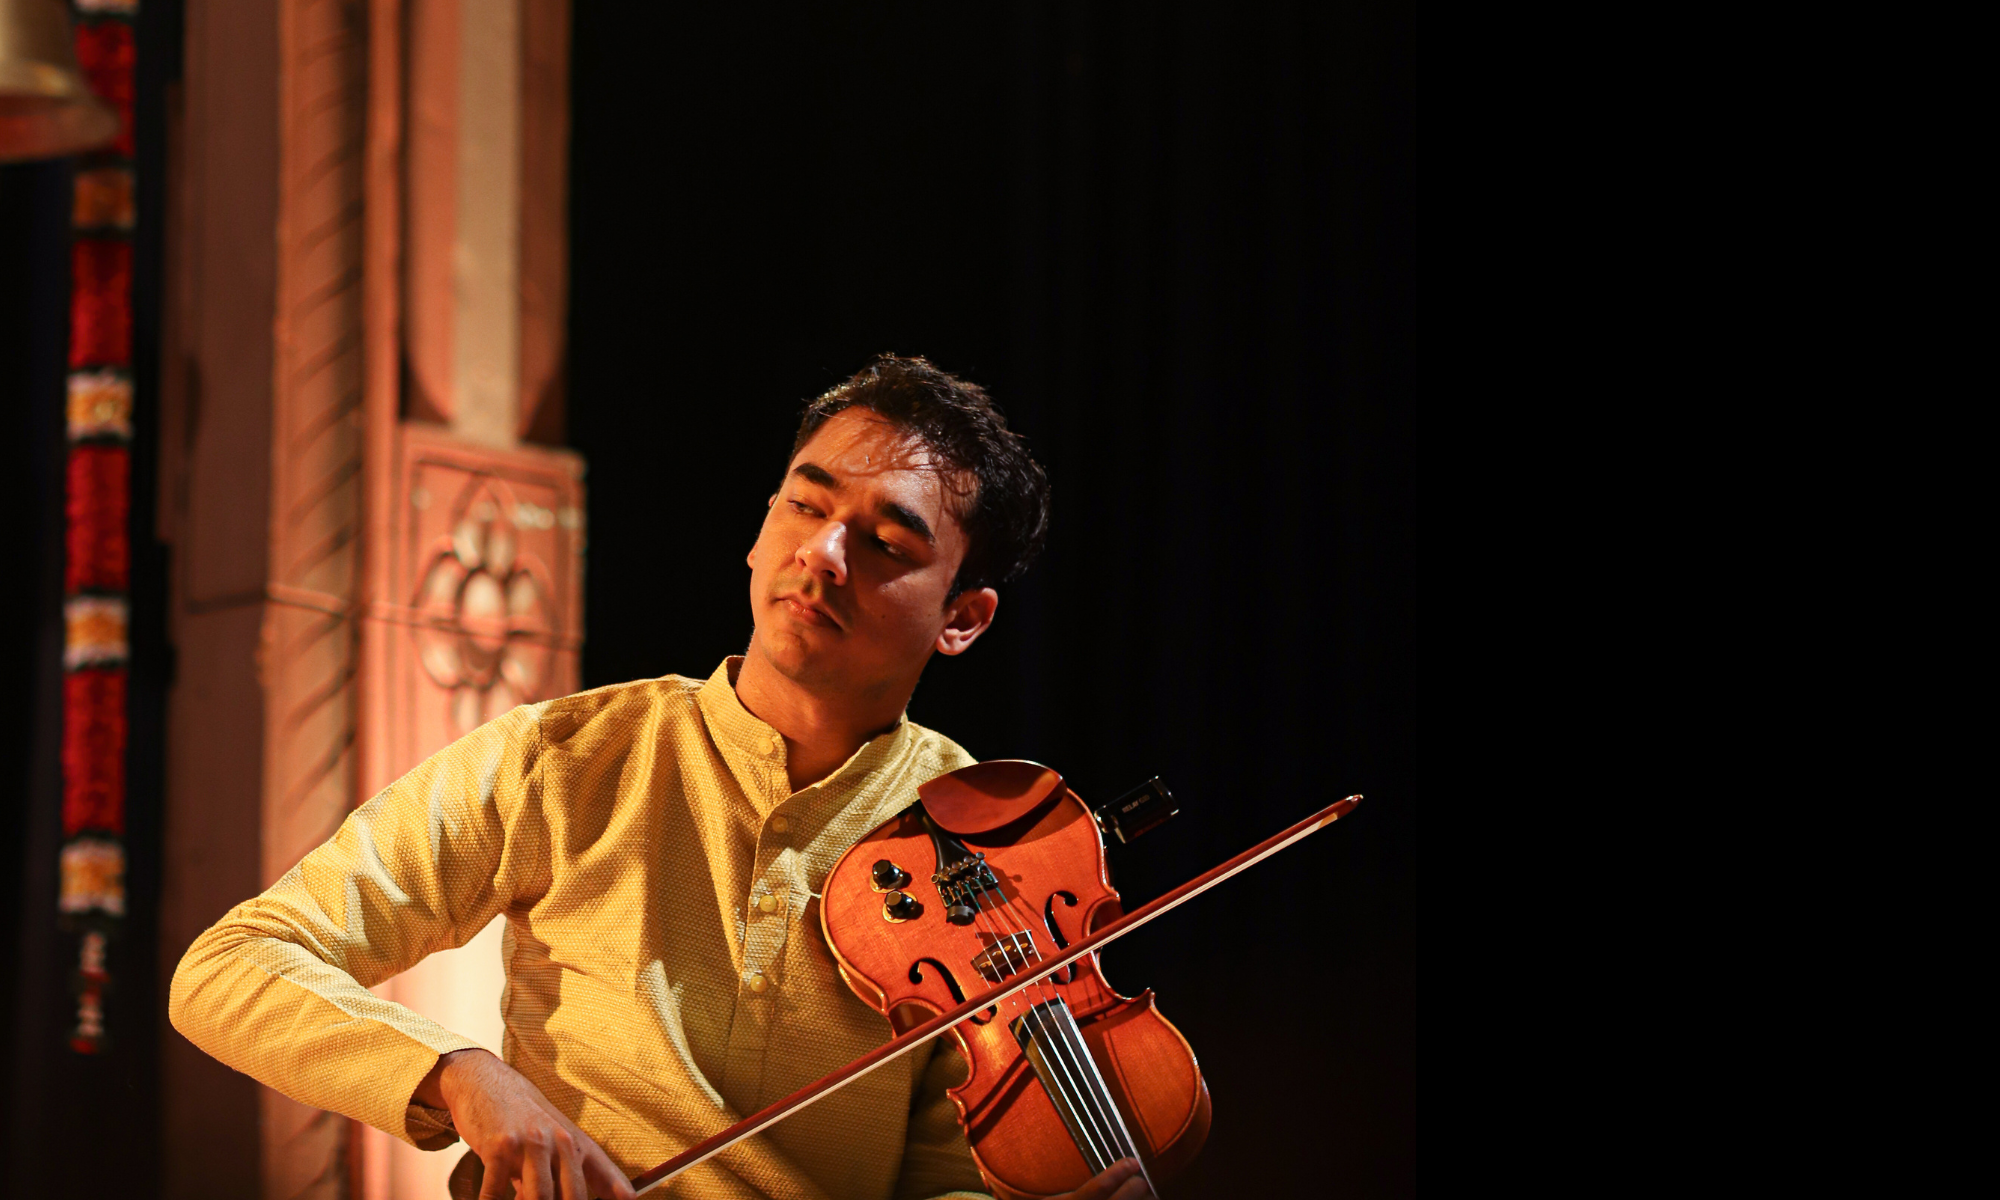 Ambi Subramaniam is sitting on stage playing violin in a yellow tunic. 